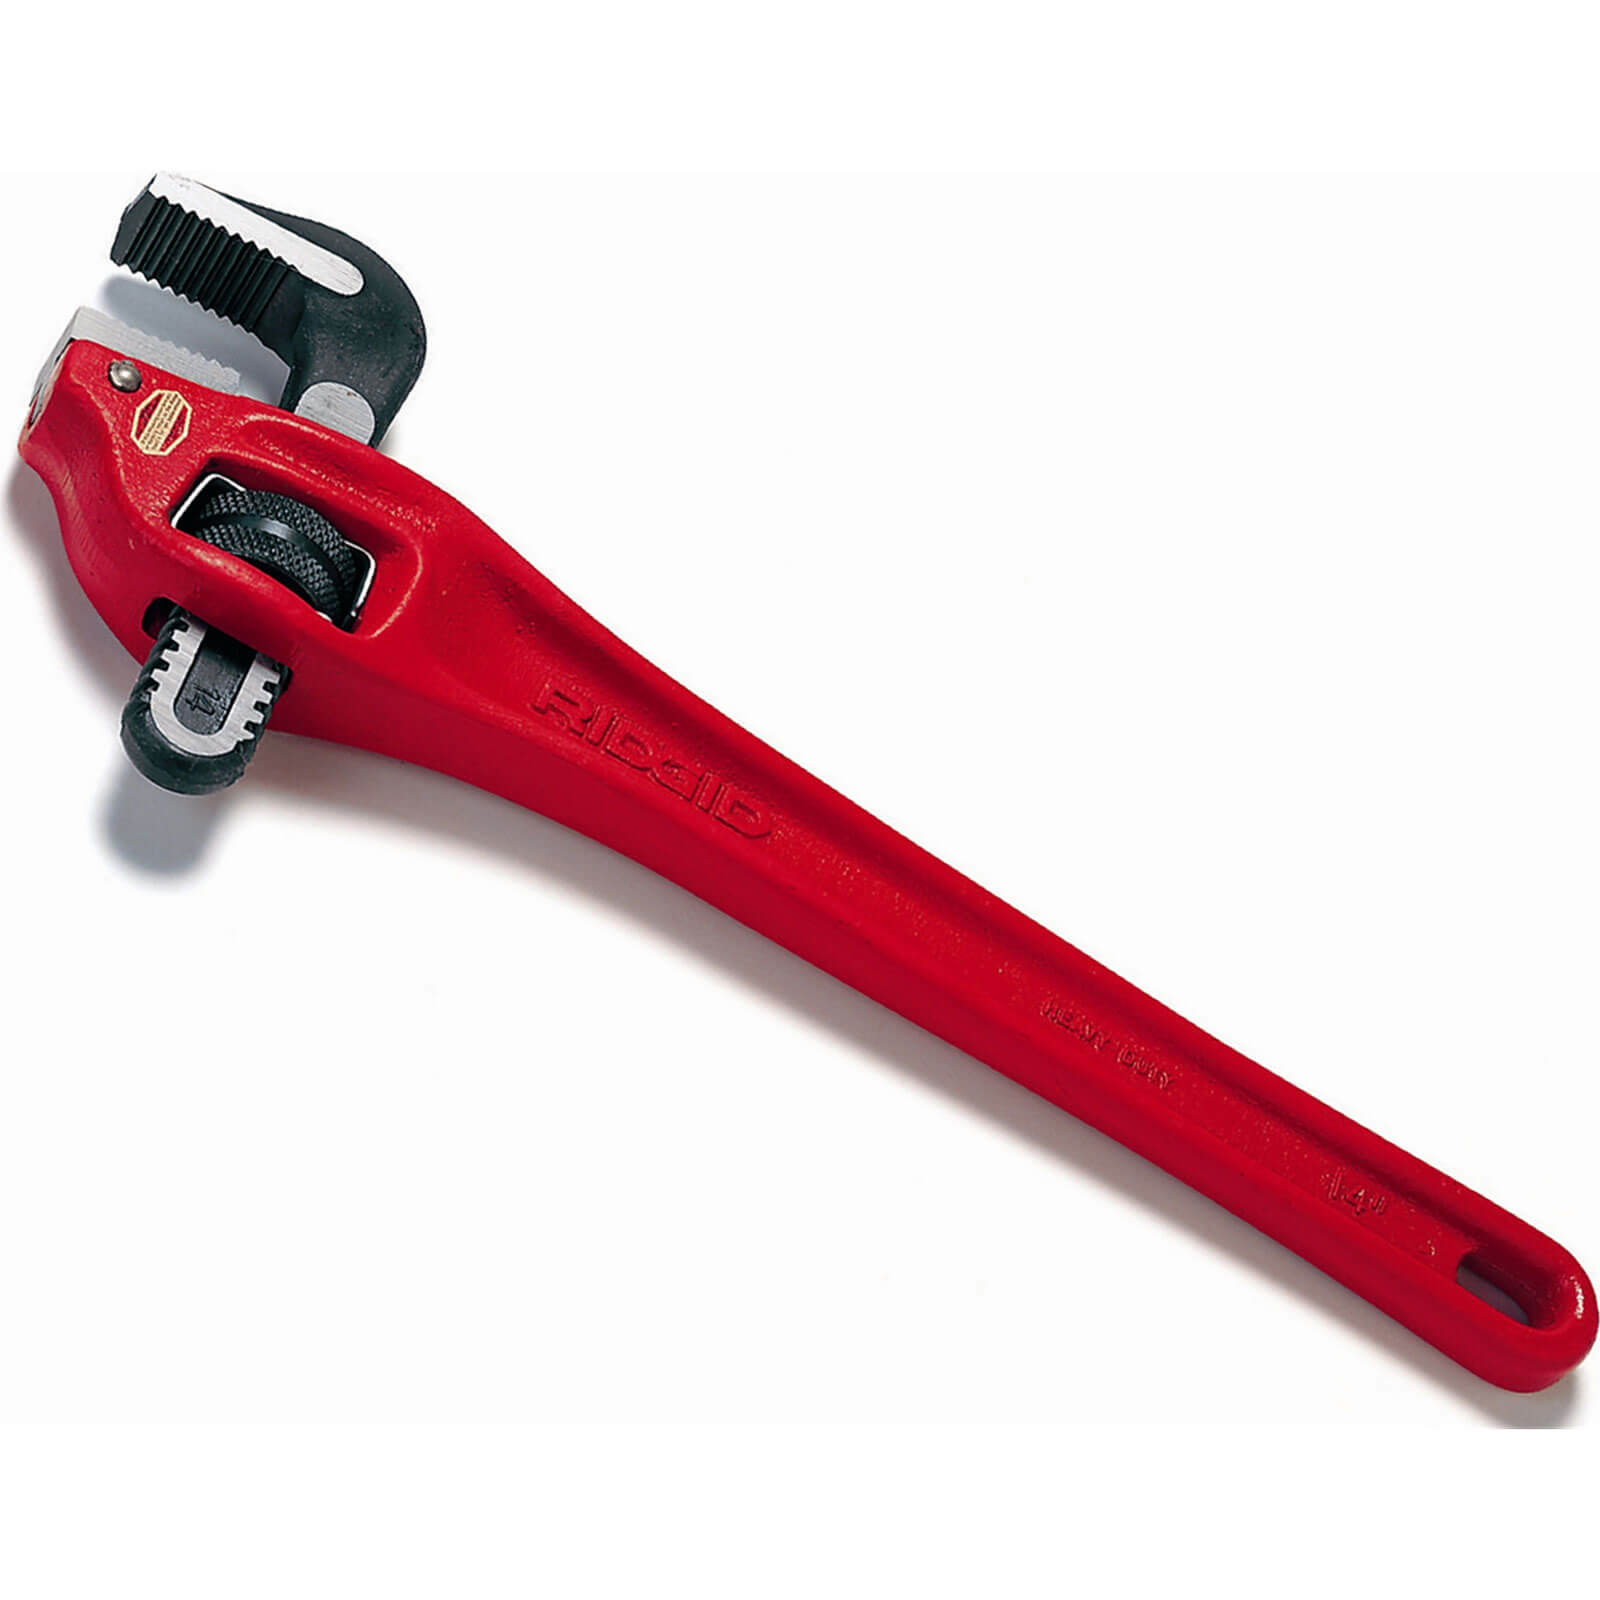 Photo of Ridgid Heavy Duty Offset Pipe Wrench 350mm